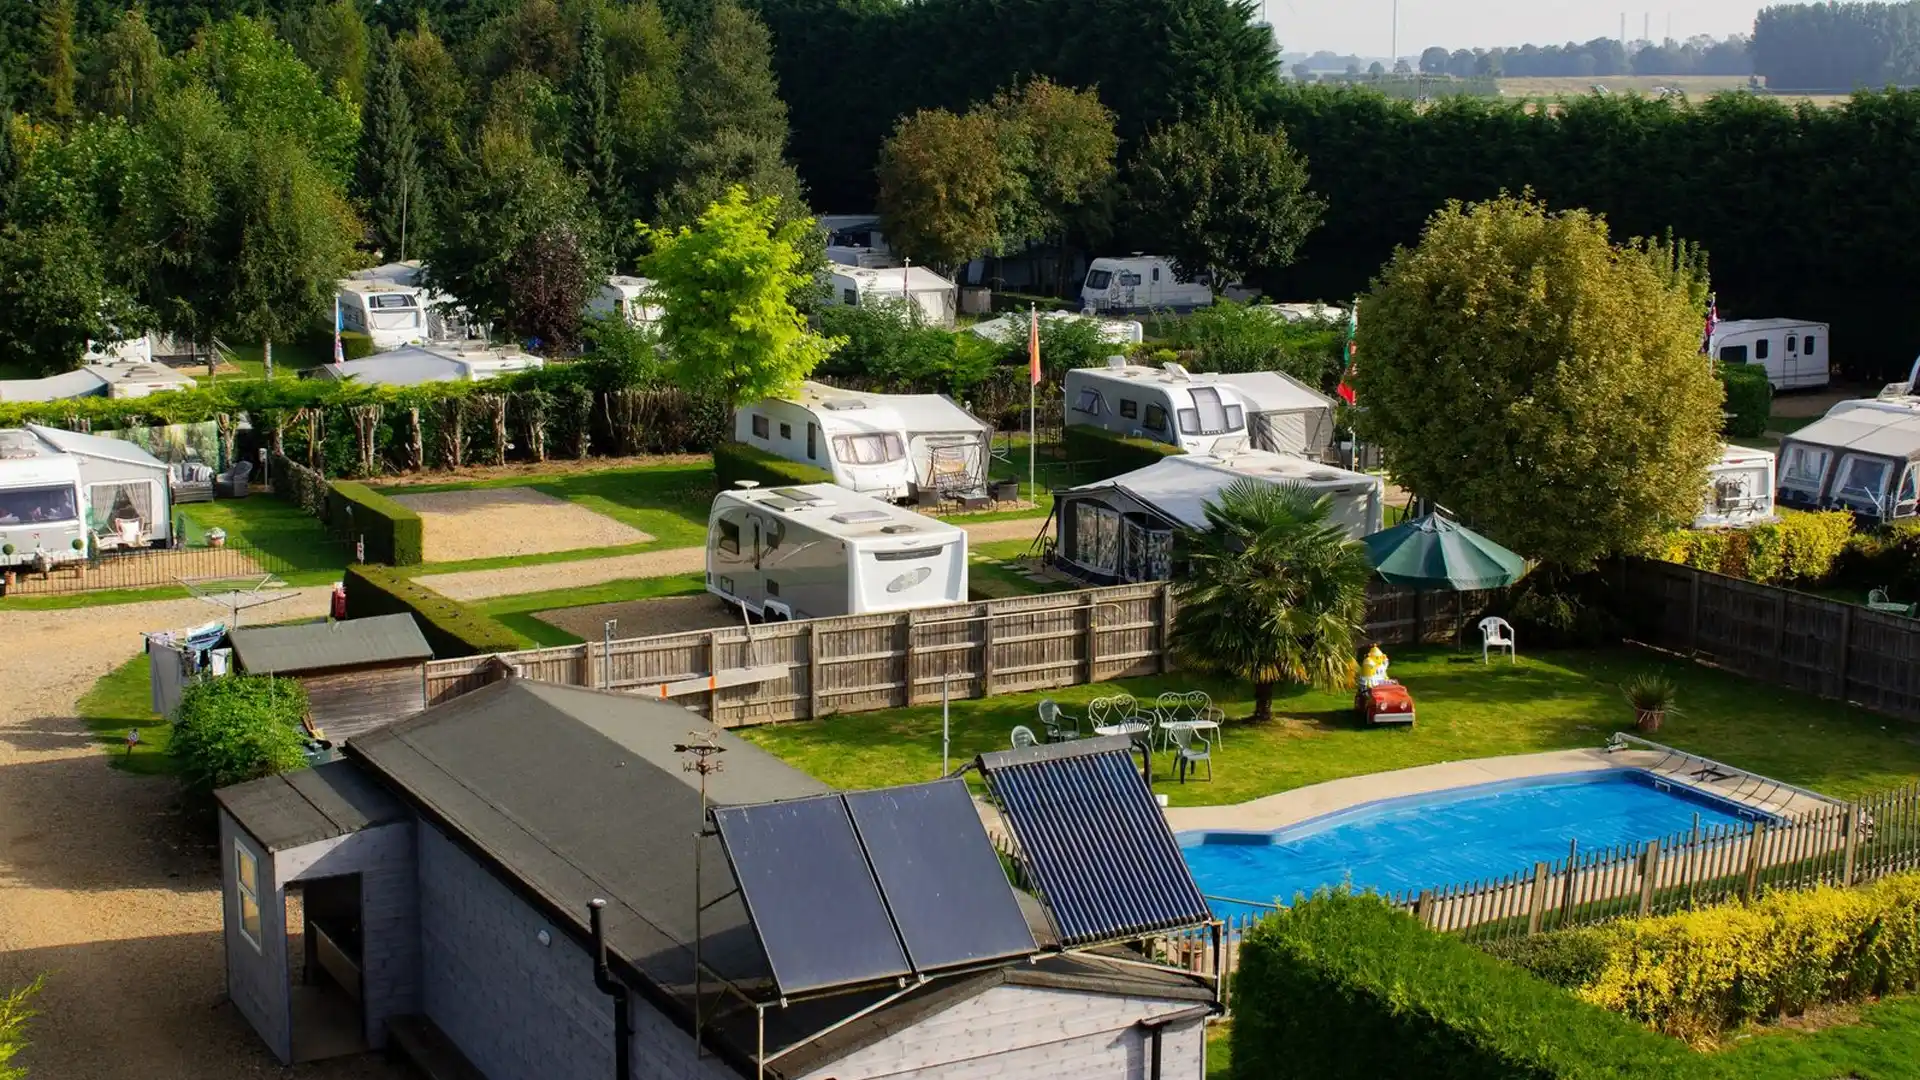 Caravan Parks with Swimming Pools in Lincolnshire